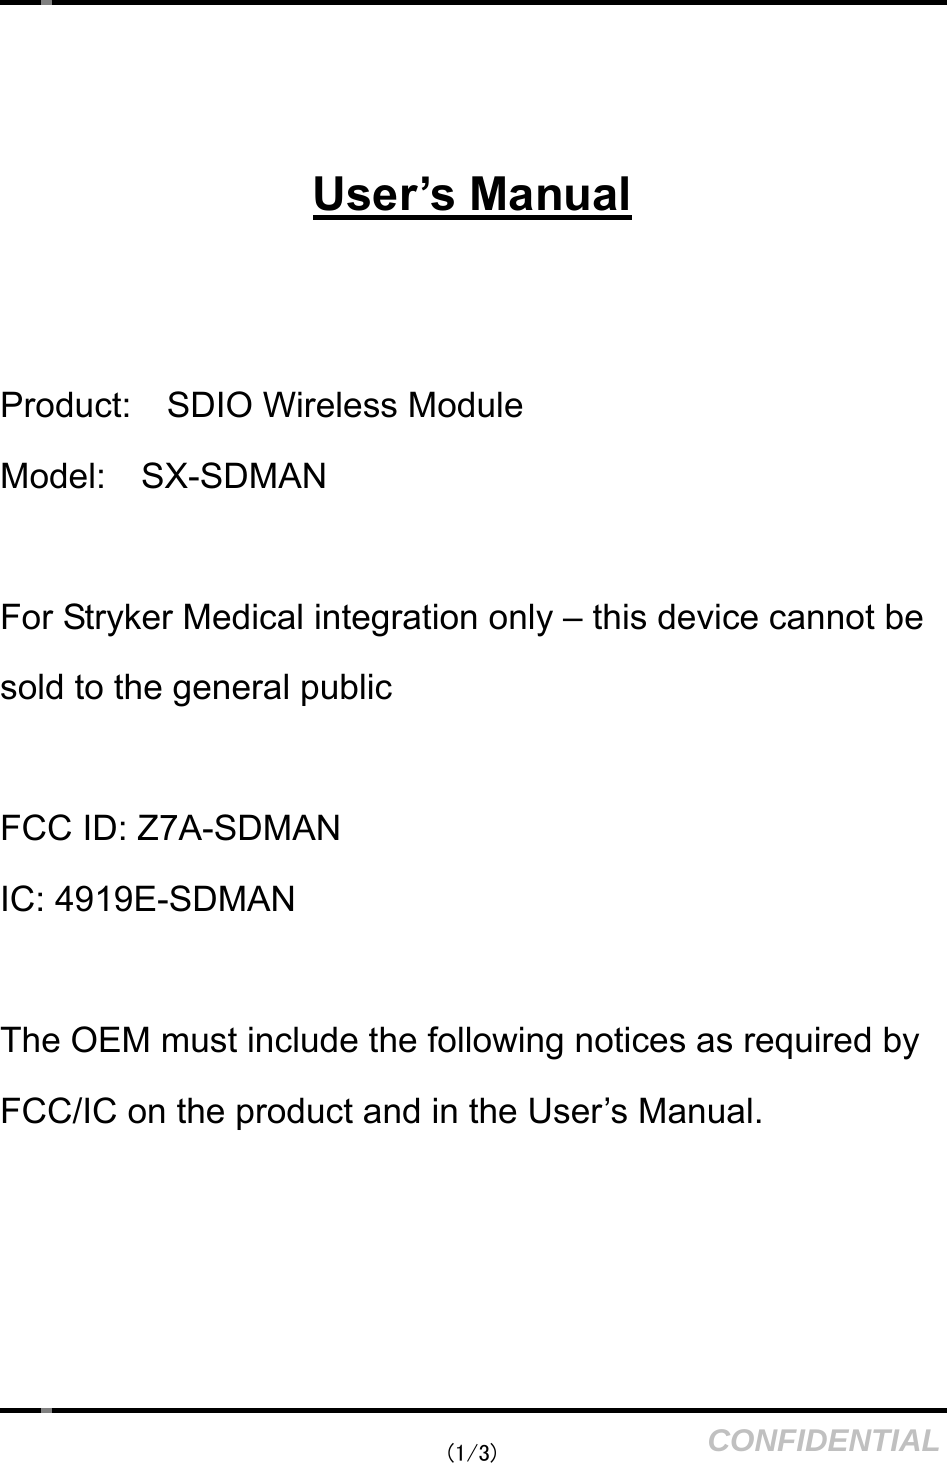    (1/3)  CONFIDENTIAL   User’s Manual   Product:    SDIO Wireless Module Model:    SX-SDMAN  For Stryker Medical integration only – this device cannot be sold to the general public  FCC ID: Z7A-SDMAN IC: 4919E-SDMAN  The OEM must include the following notices as required by FCC/IC on the product and in the User’s Manual.